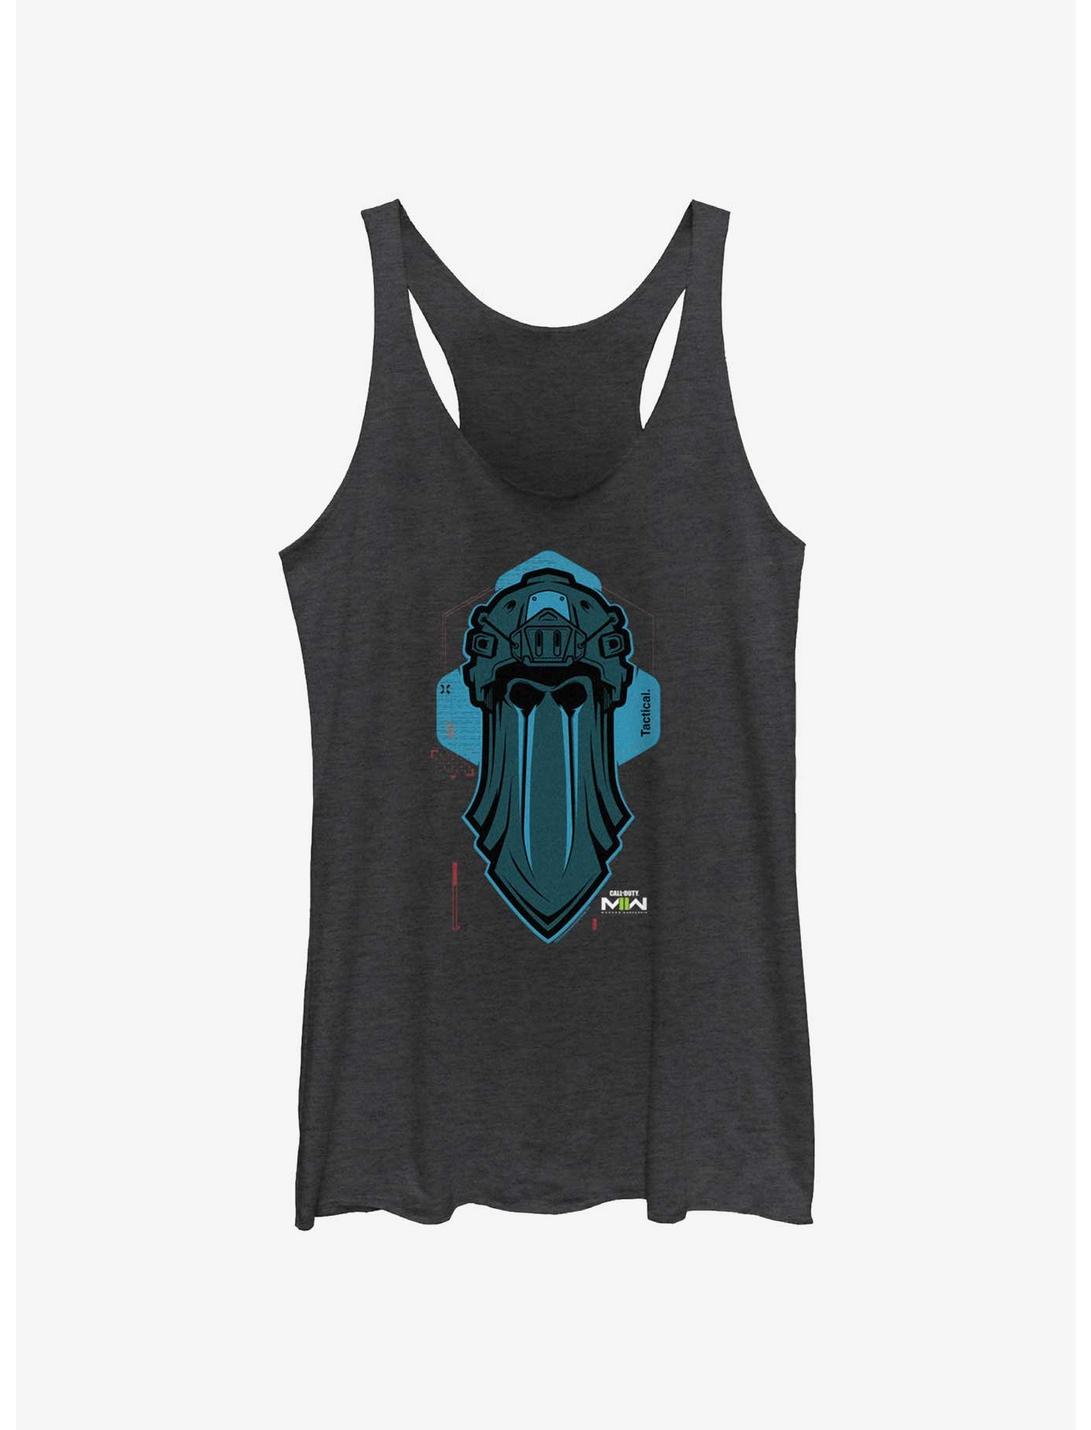 Call of Duty Enemy Unknown Girls Tank, BLK HTR, hi-res